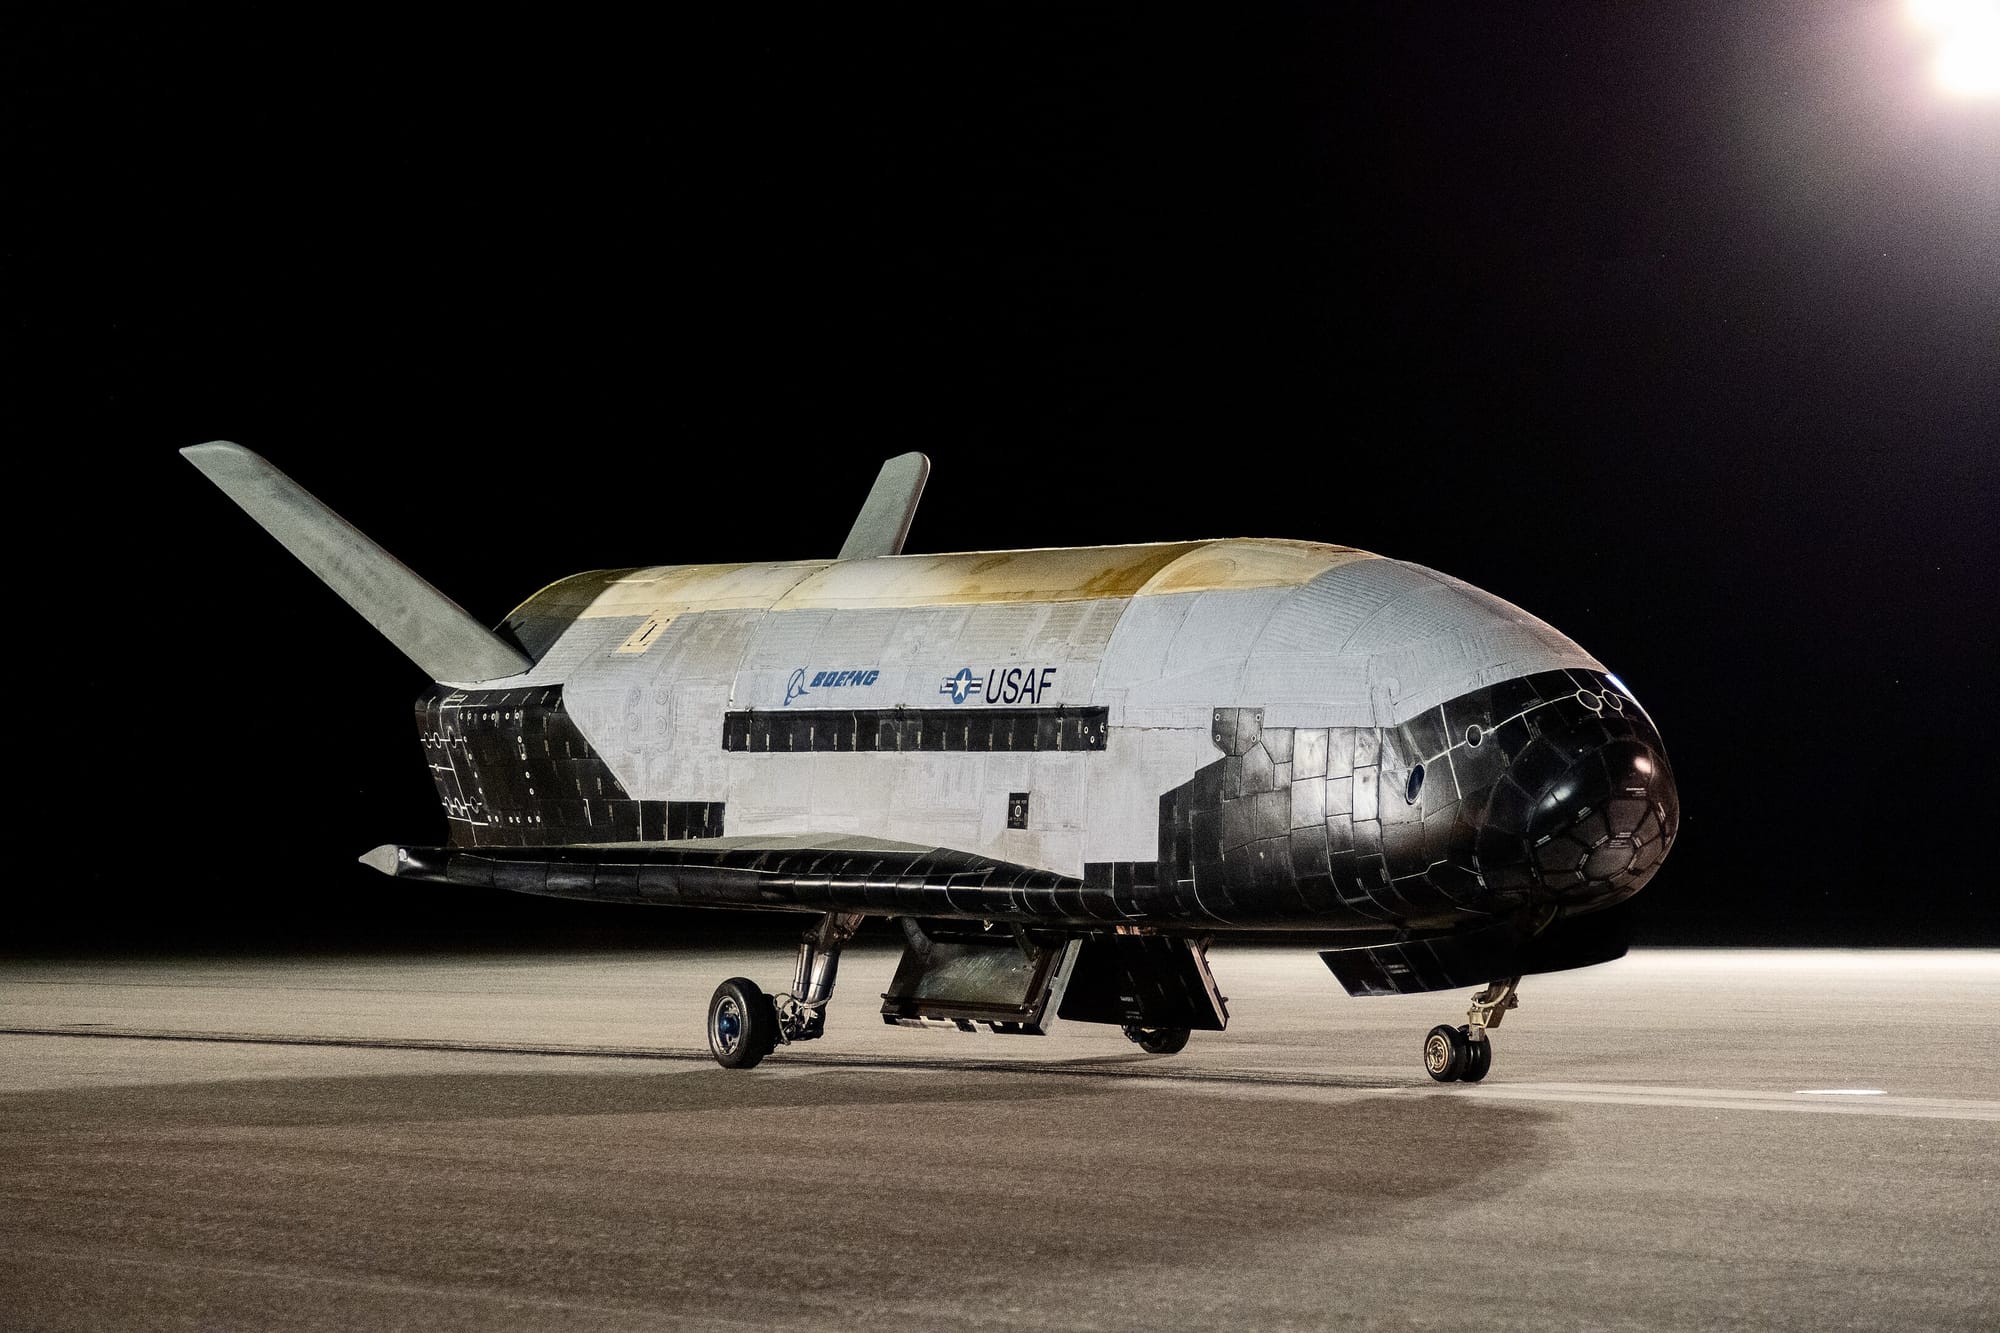 X-37B Vehicle 1 on the runway at Kennedy Space Center on the 12th of November 2022 after the OTV-6 mission. ©USSF